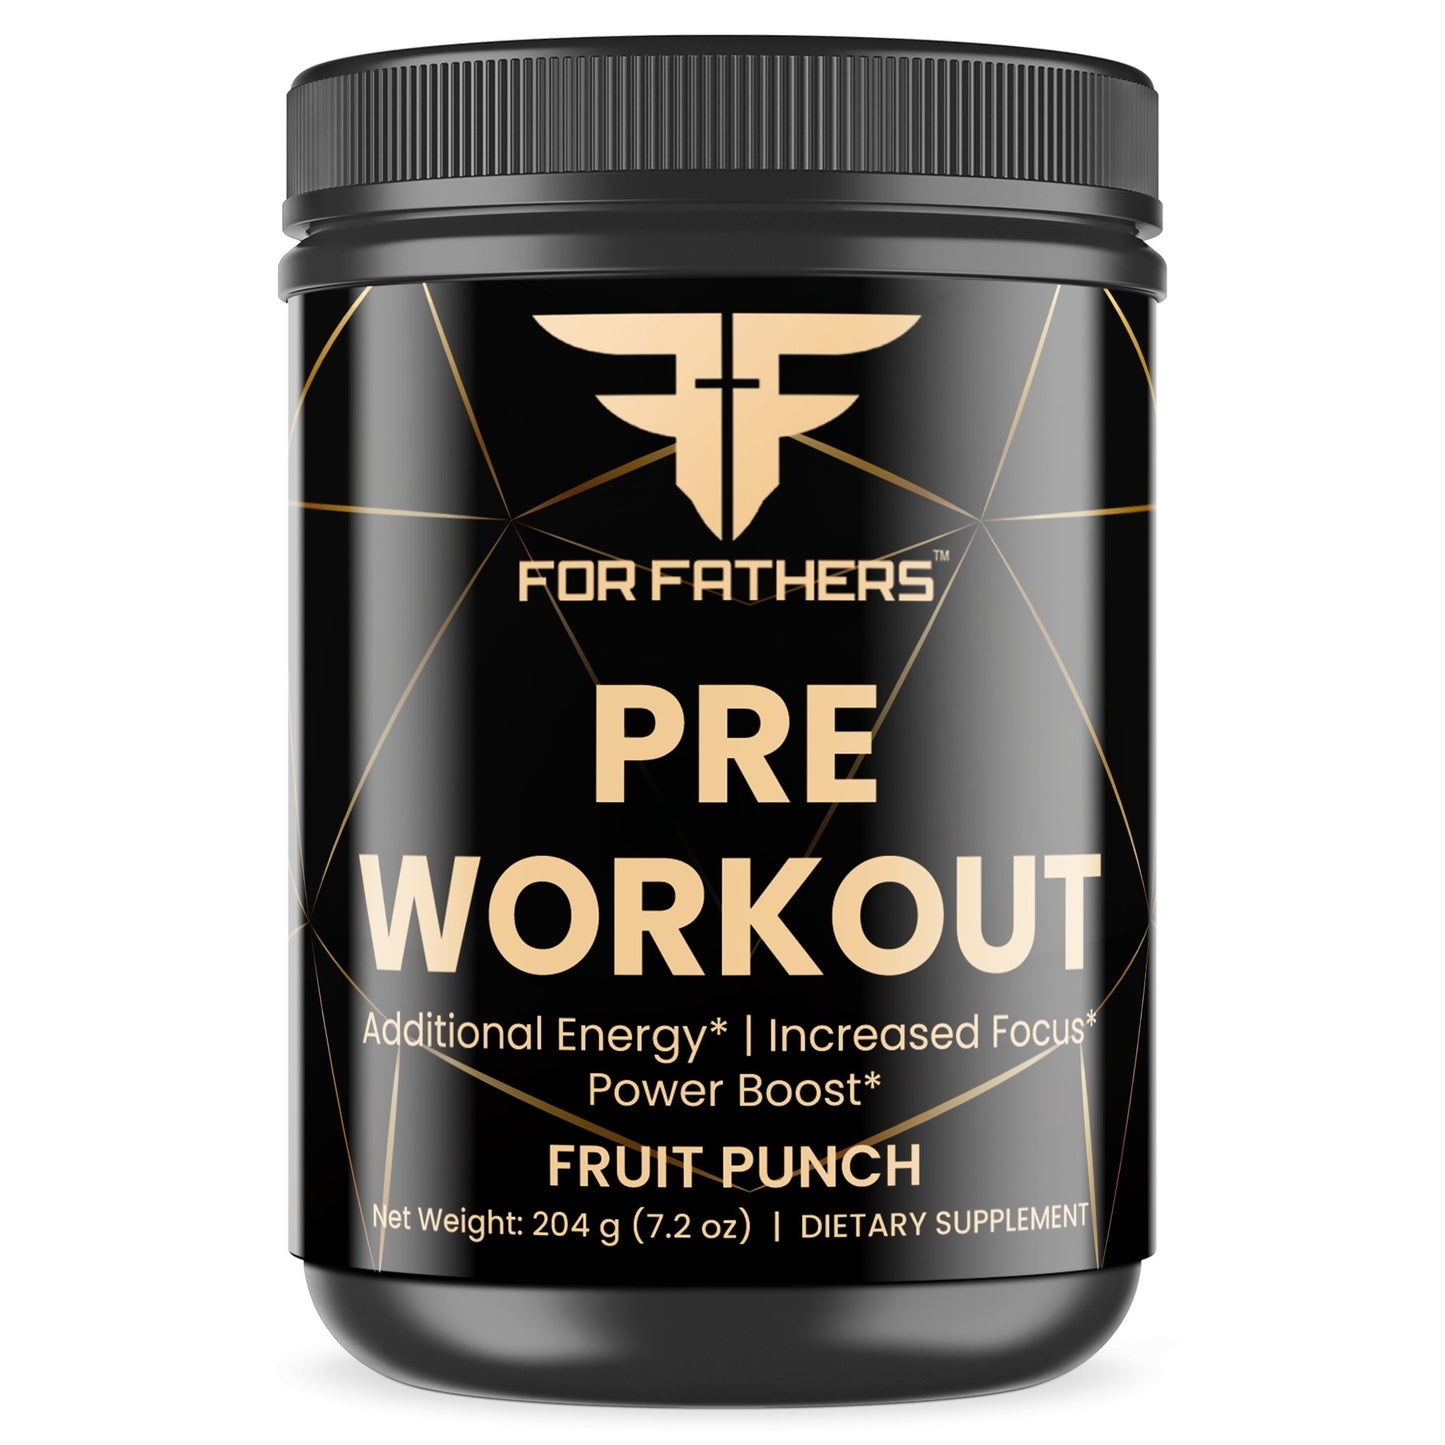 Powerful Pre-Workout Fruit Punch - For Fathers Fitness